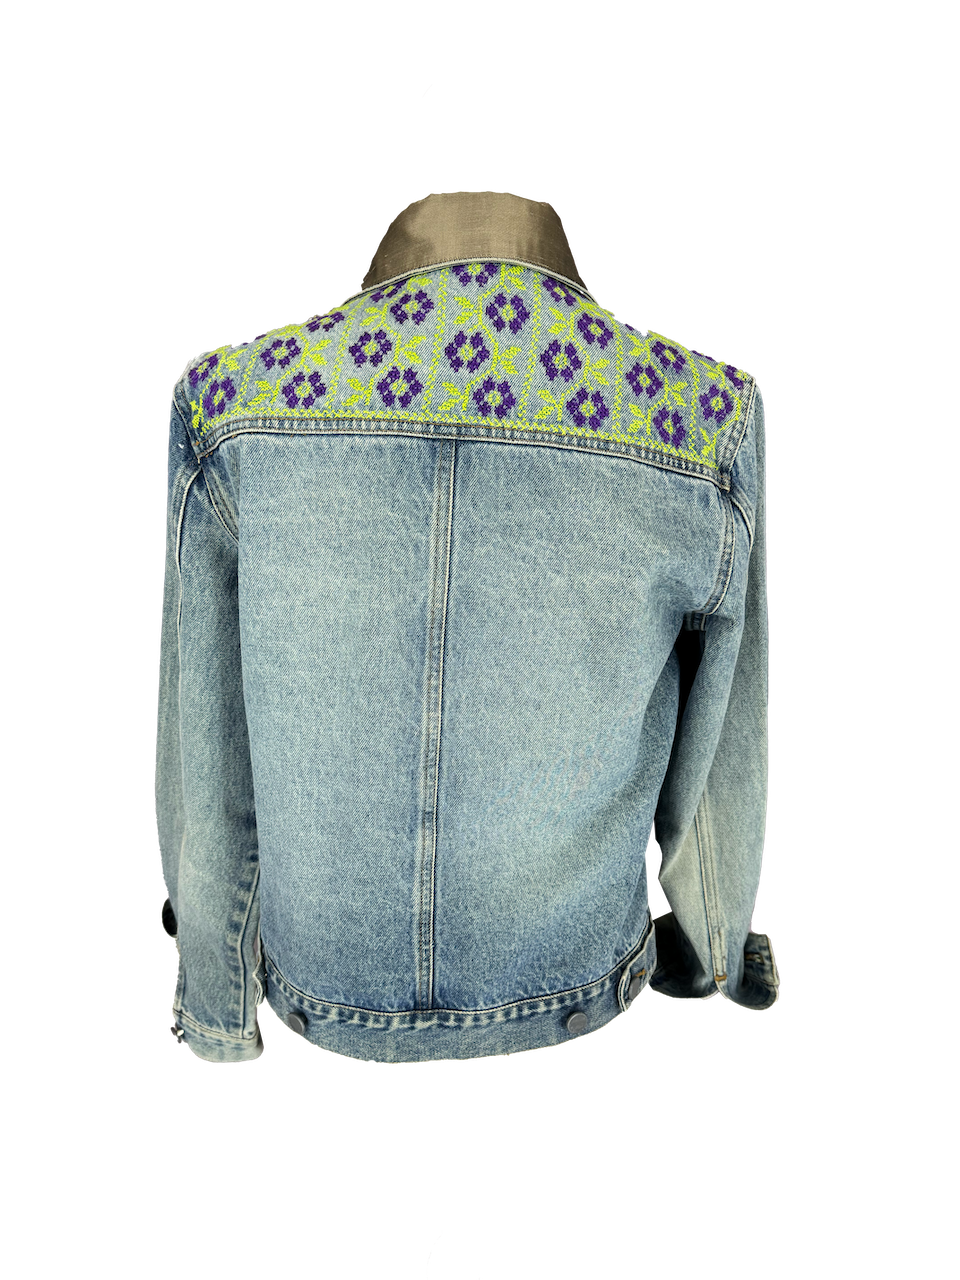 The Embroidered Denim Jacket in Lime Green and Purple